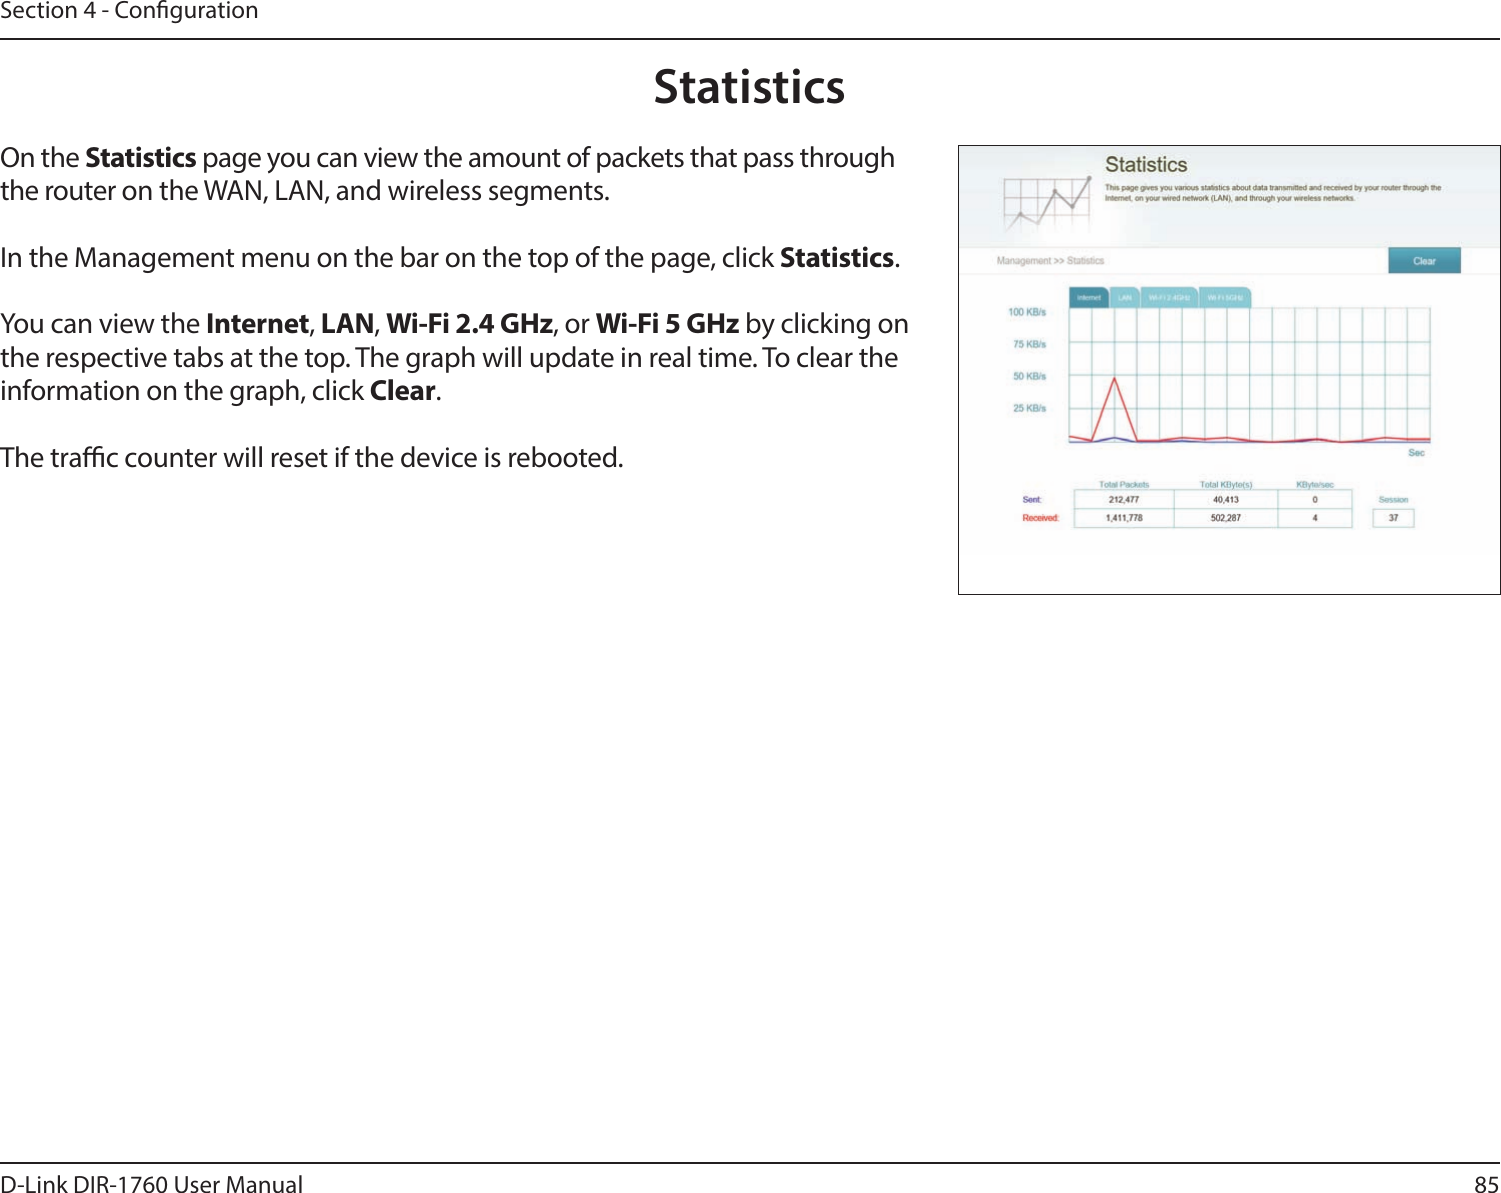 85D-Link DIR-1760 User ManualSection 4 - CongurationStatisticsOn the Statistics page you can view the amount of packets that pass through the router on the WAN, LAN, and wireless segments.In the Management menu on the bar on the top of the page, click Statistics.You can view the Internet, LAN, Wi-Fi 2.4 GHz, or Wi-Fi 5 GHz by clicking on the respective tabs at the top. The graph will update in real time. To clear the information on the graph, click Clear.The trac counter will reset if the device is rebooted.